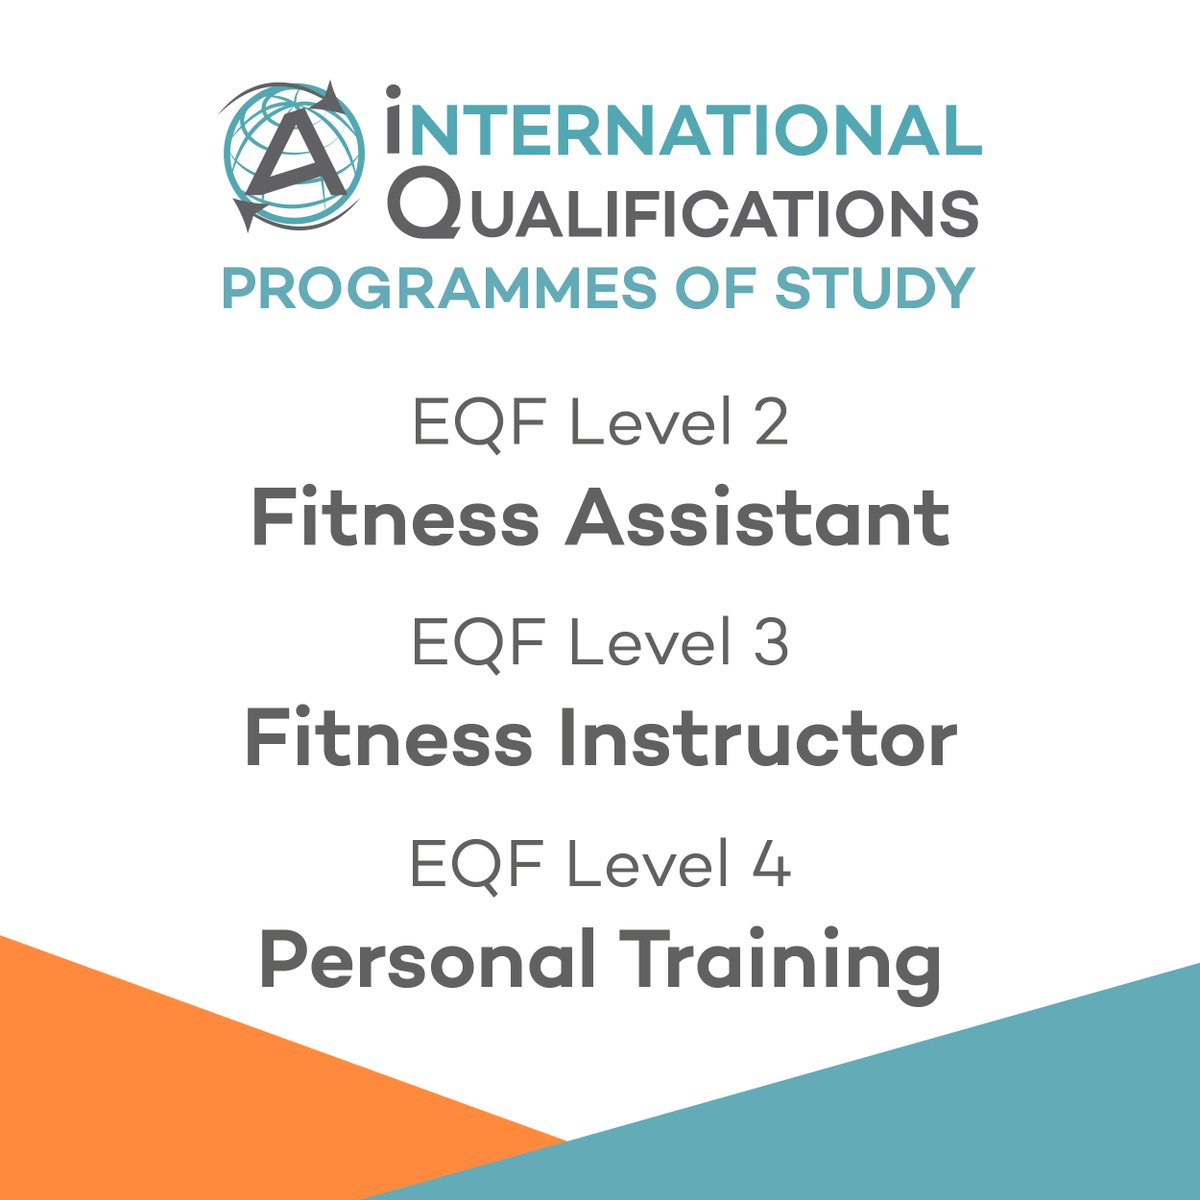 Active IQ’s international programmes of study have been developed to equip individuals with the essential skills and knowledge required to excel as fitness professionals and pave the way to employment. Find out more here: activeiq.co.uk/international